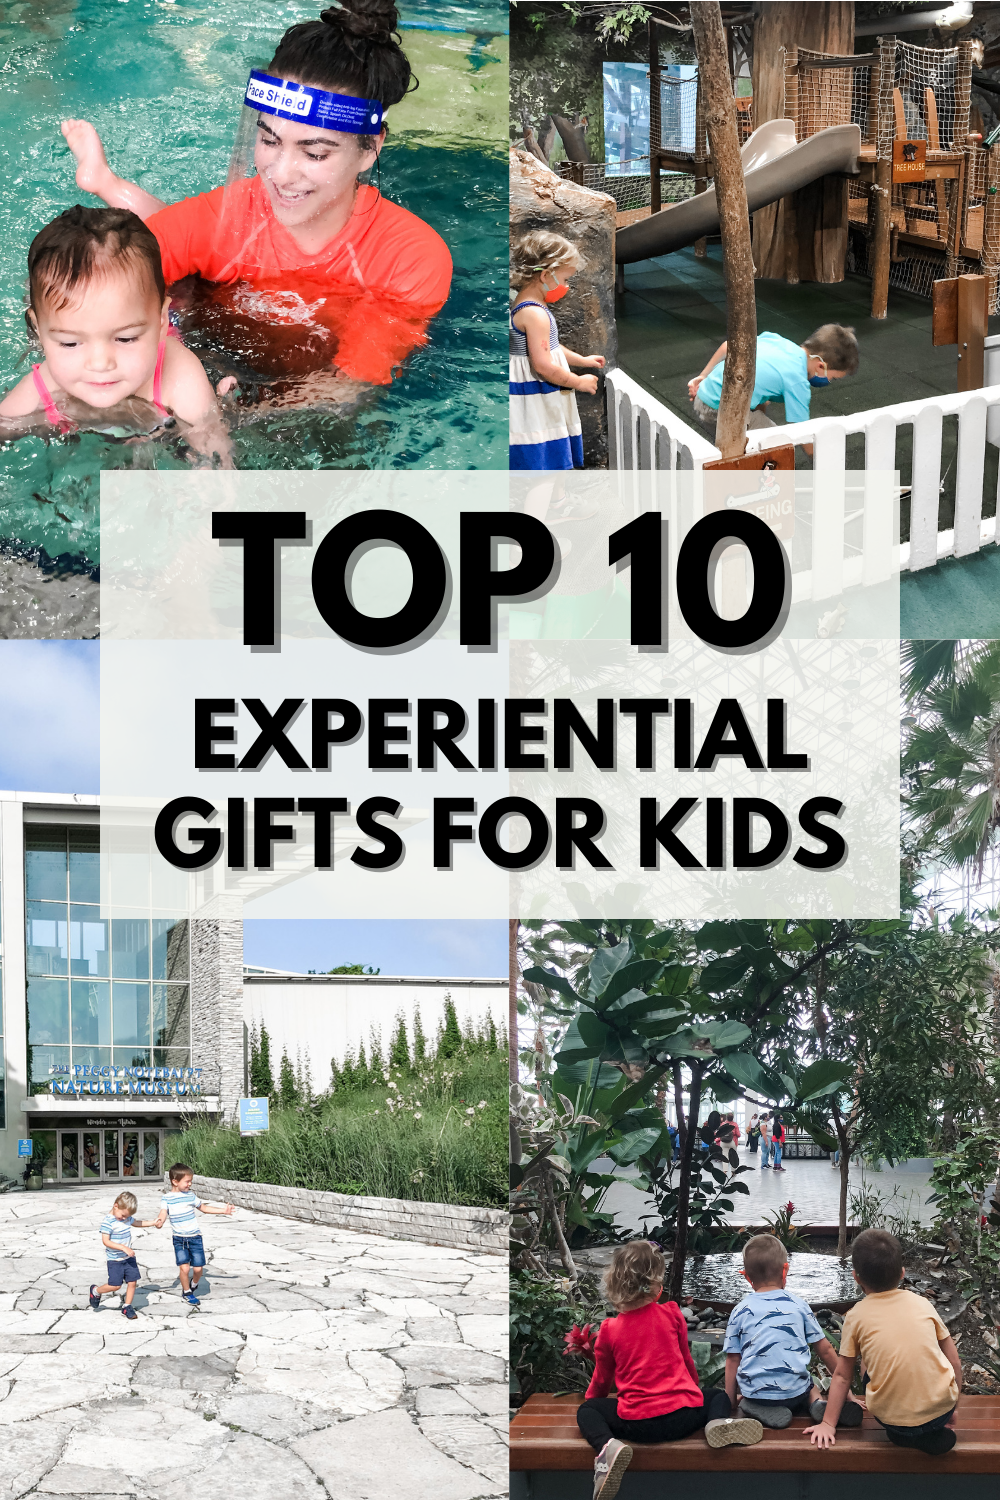 We Love Experiential Gifts for Kids